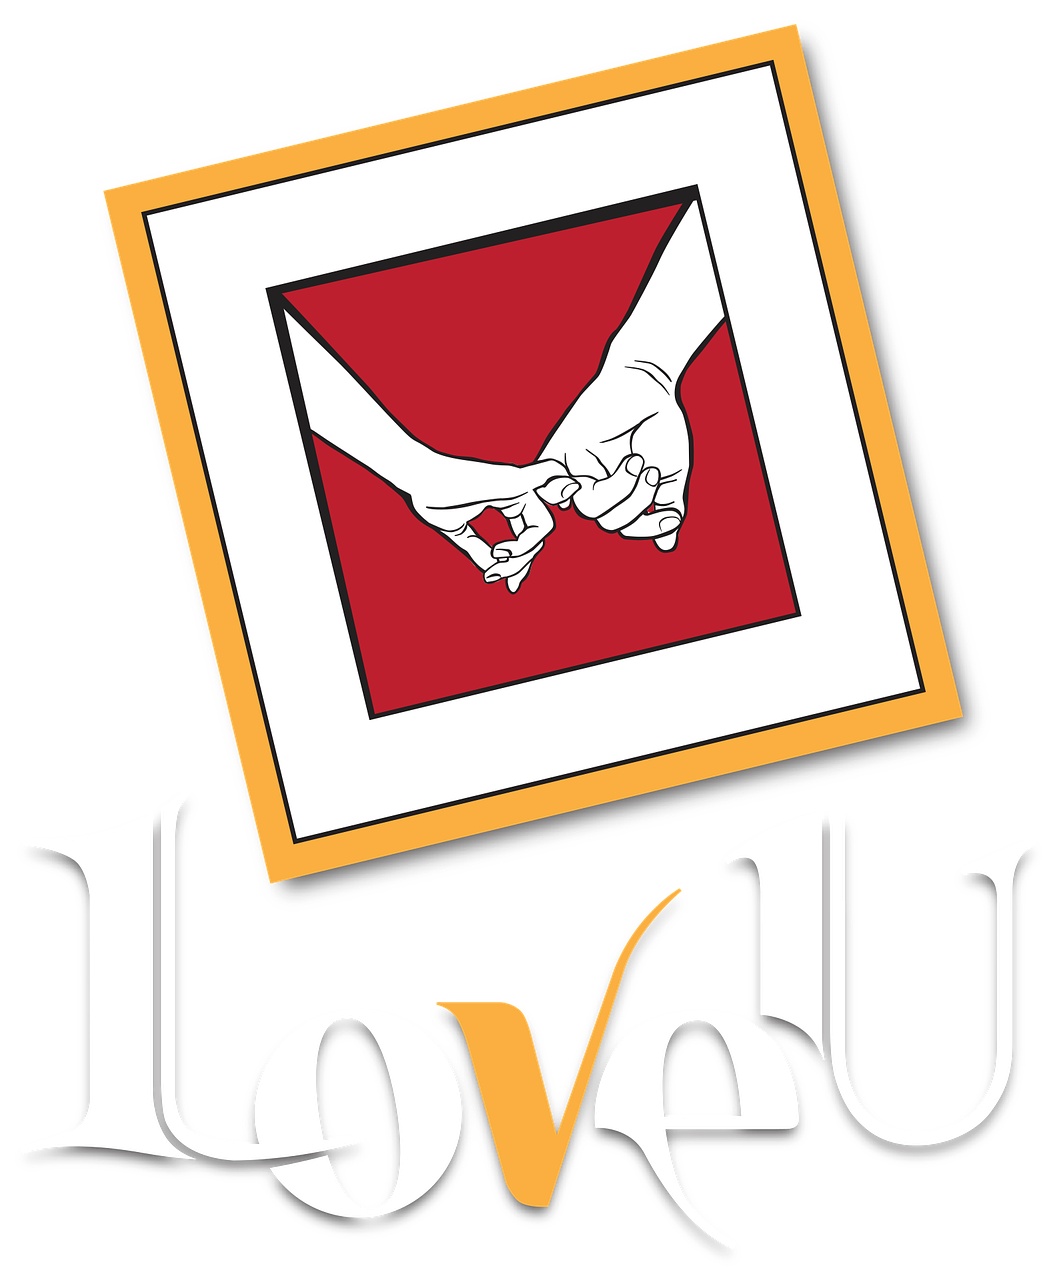 a couple holding hands with the word love u, an album cover, by Dan Luvisi, vectorized logo style, award winning ”, mark waid, ! low contrast!